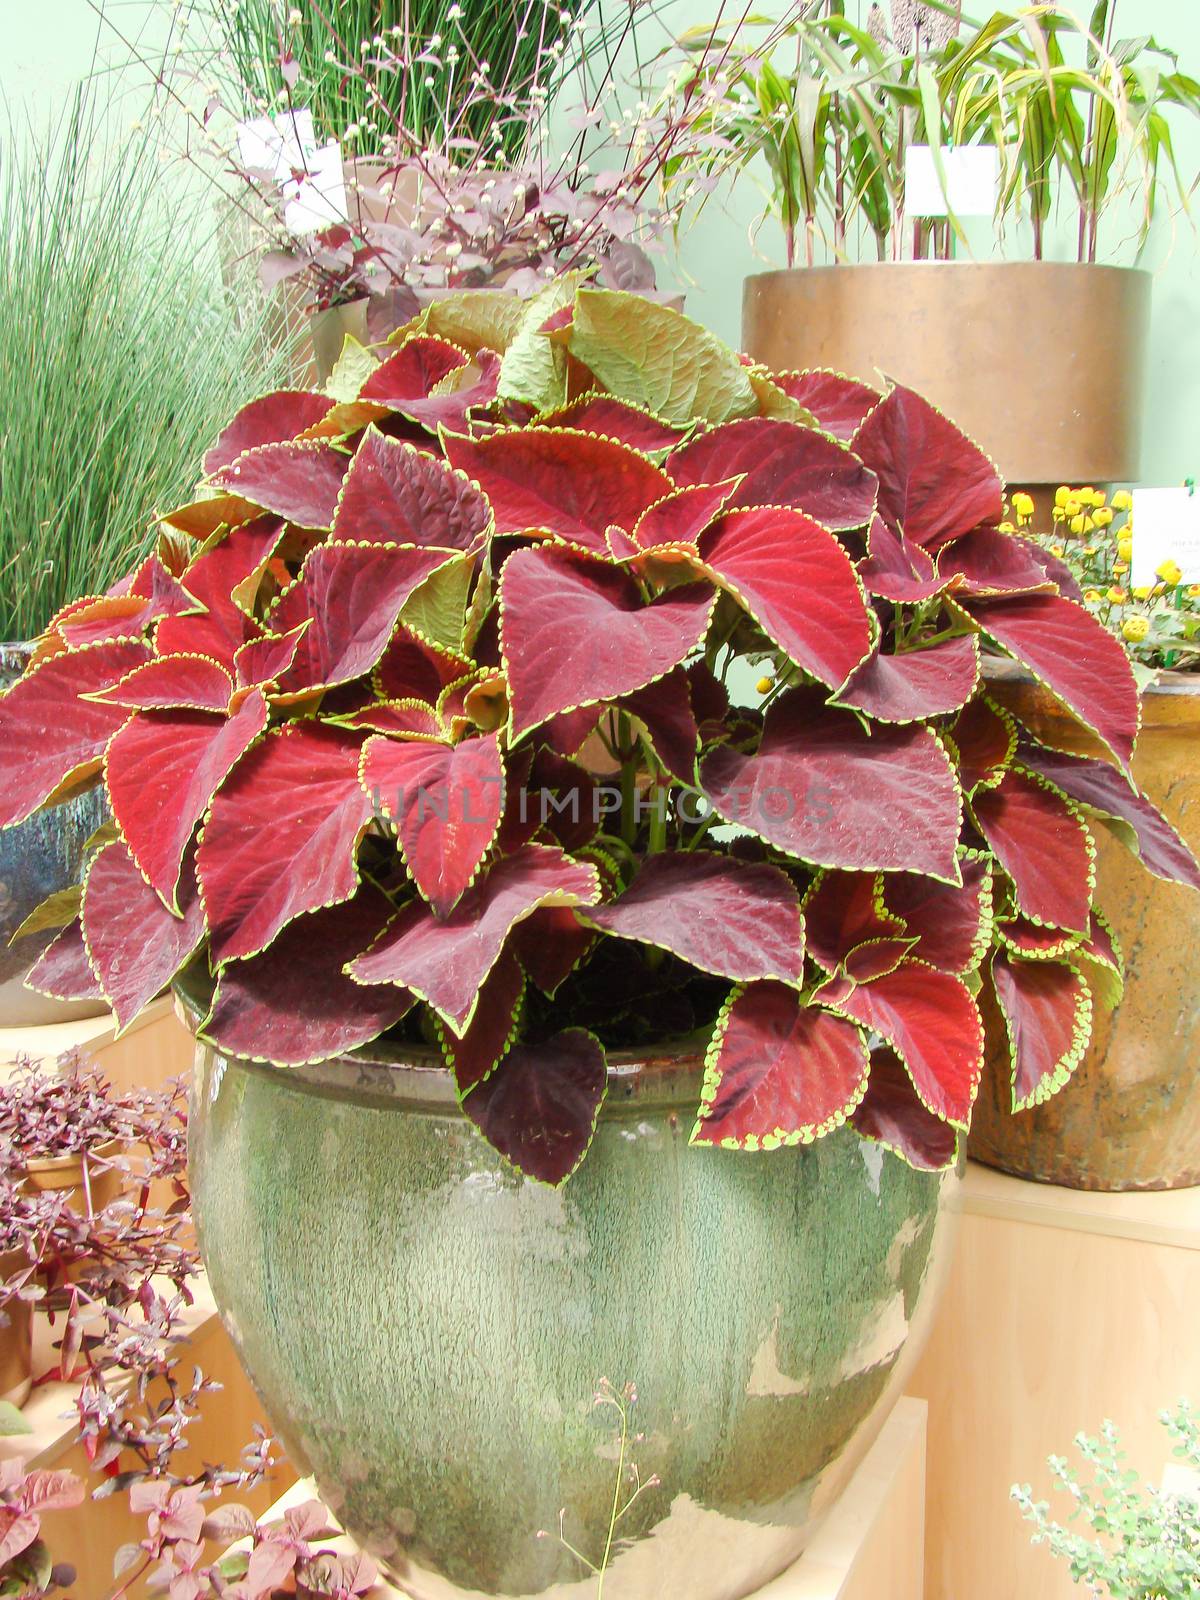 Red purple leaves of the coleus, Plectranthus scutellarioides by yuiyuize